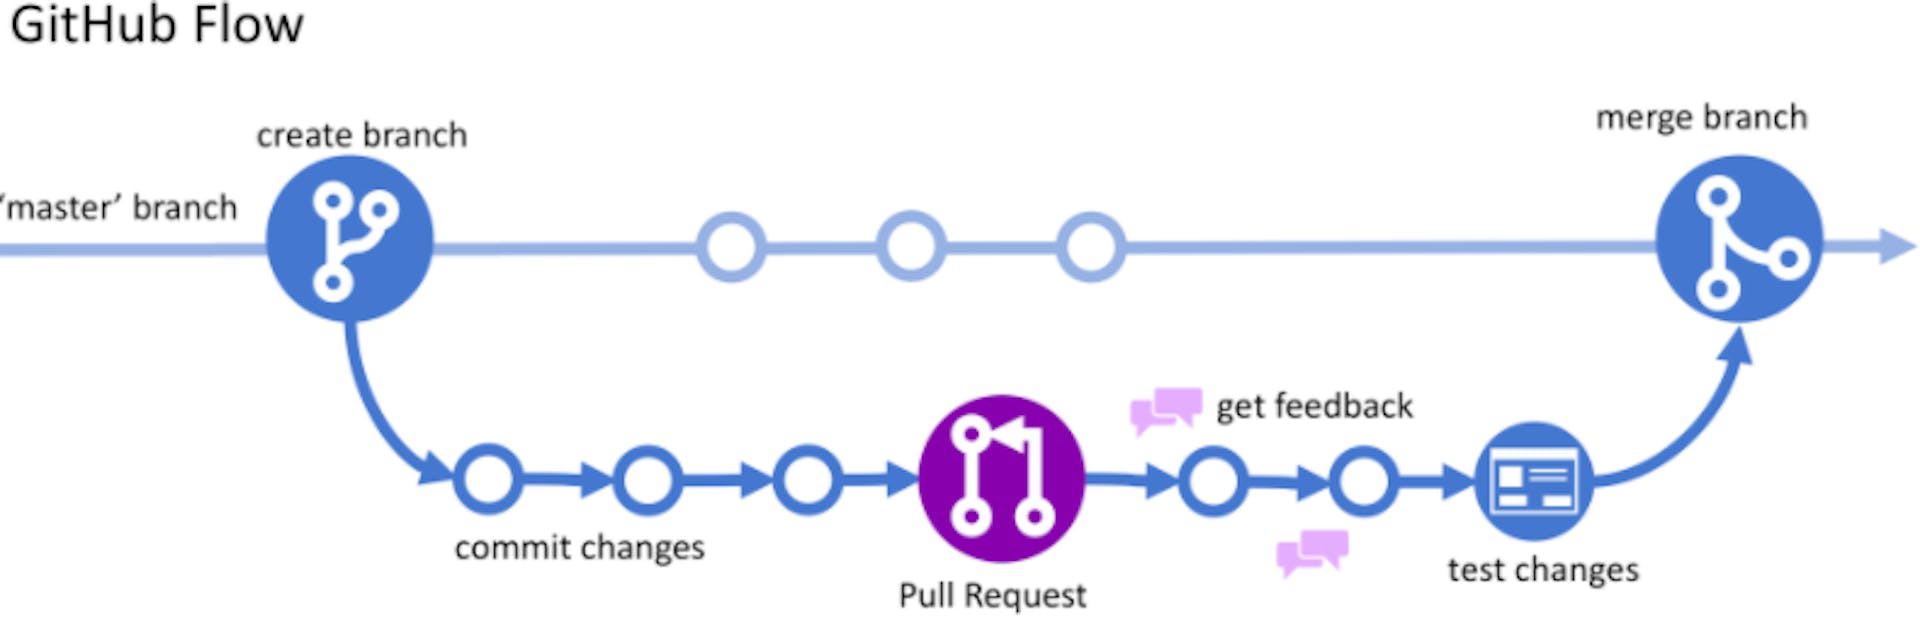 Github Workflow Image from Build5Nines